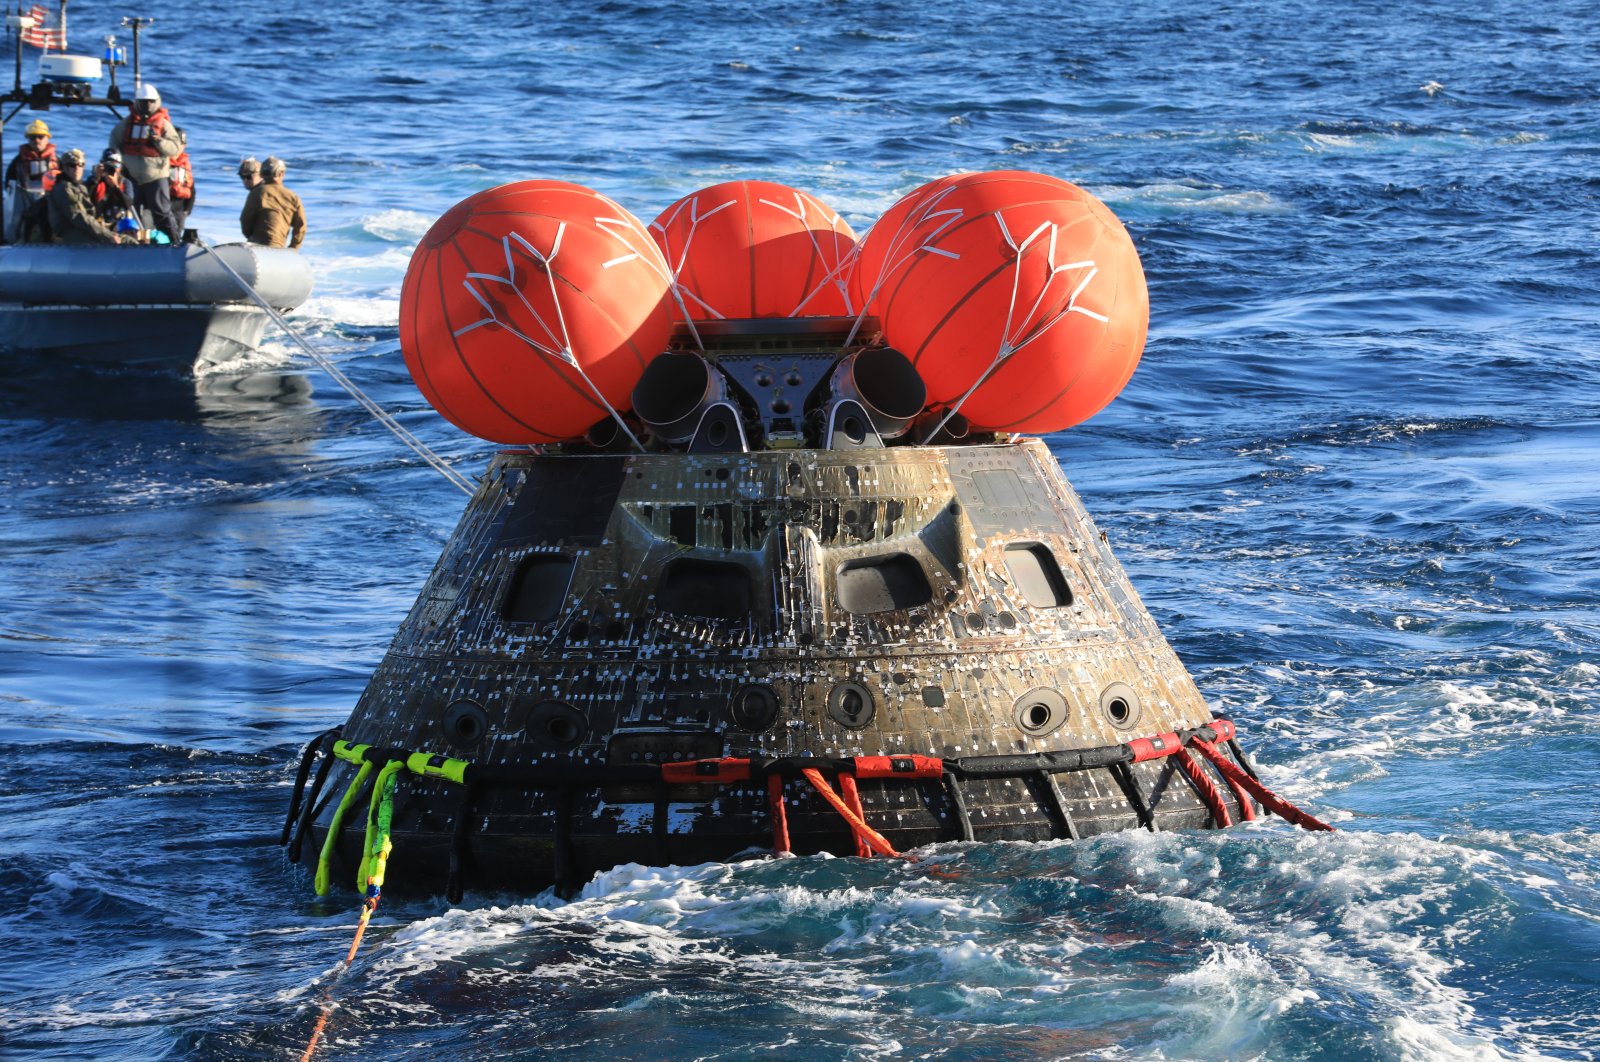 NASA&#039;s Orion spacecraft for the Artemis I mission is seen after splashing down in the Pacific Ocean after a 25.5-day mission to the Moon, Dec. 11, 2022. (Reuters Photo)